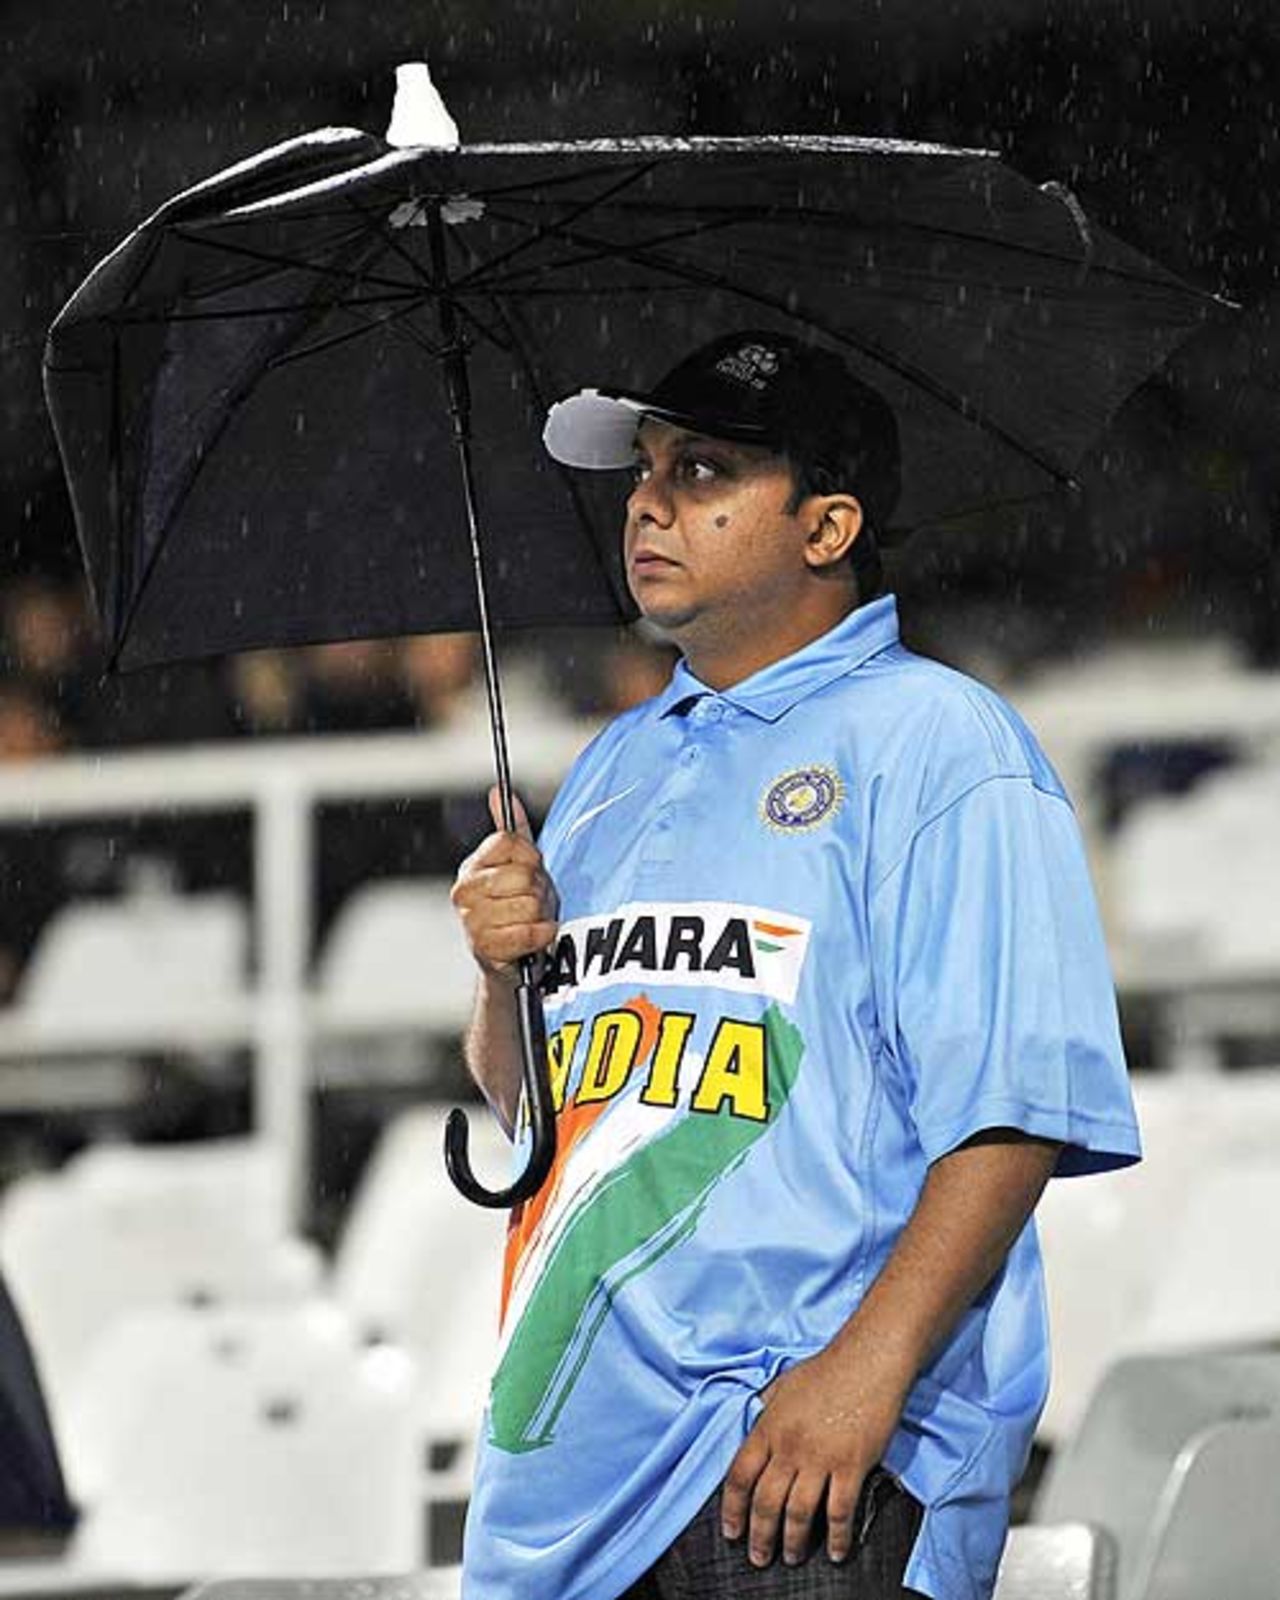 An Indian fan waits in vain for the game to start, Chennai Super Kings v Kolkata Knight Riders, IPL, 13th match, Cape Town, April 25, 2009